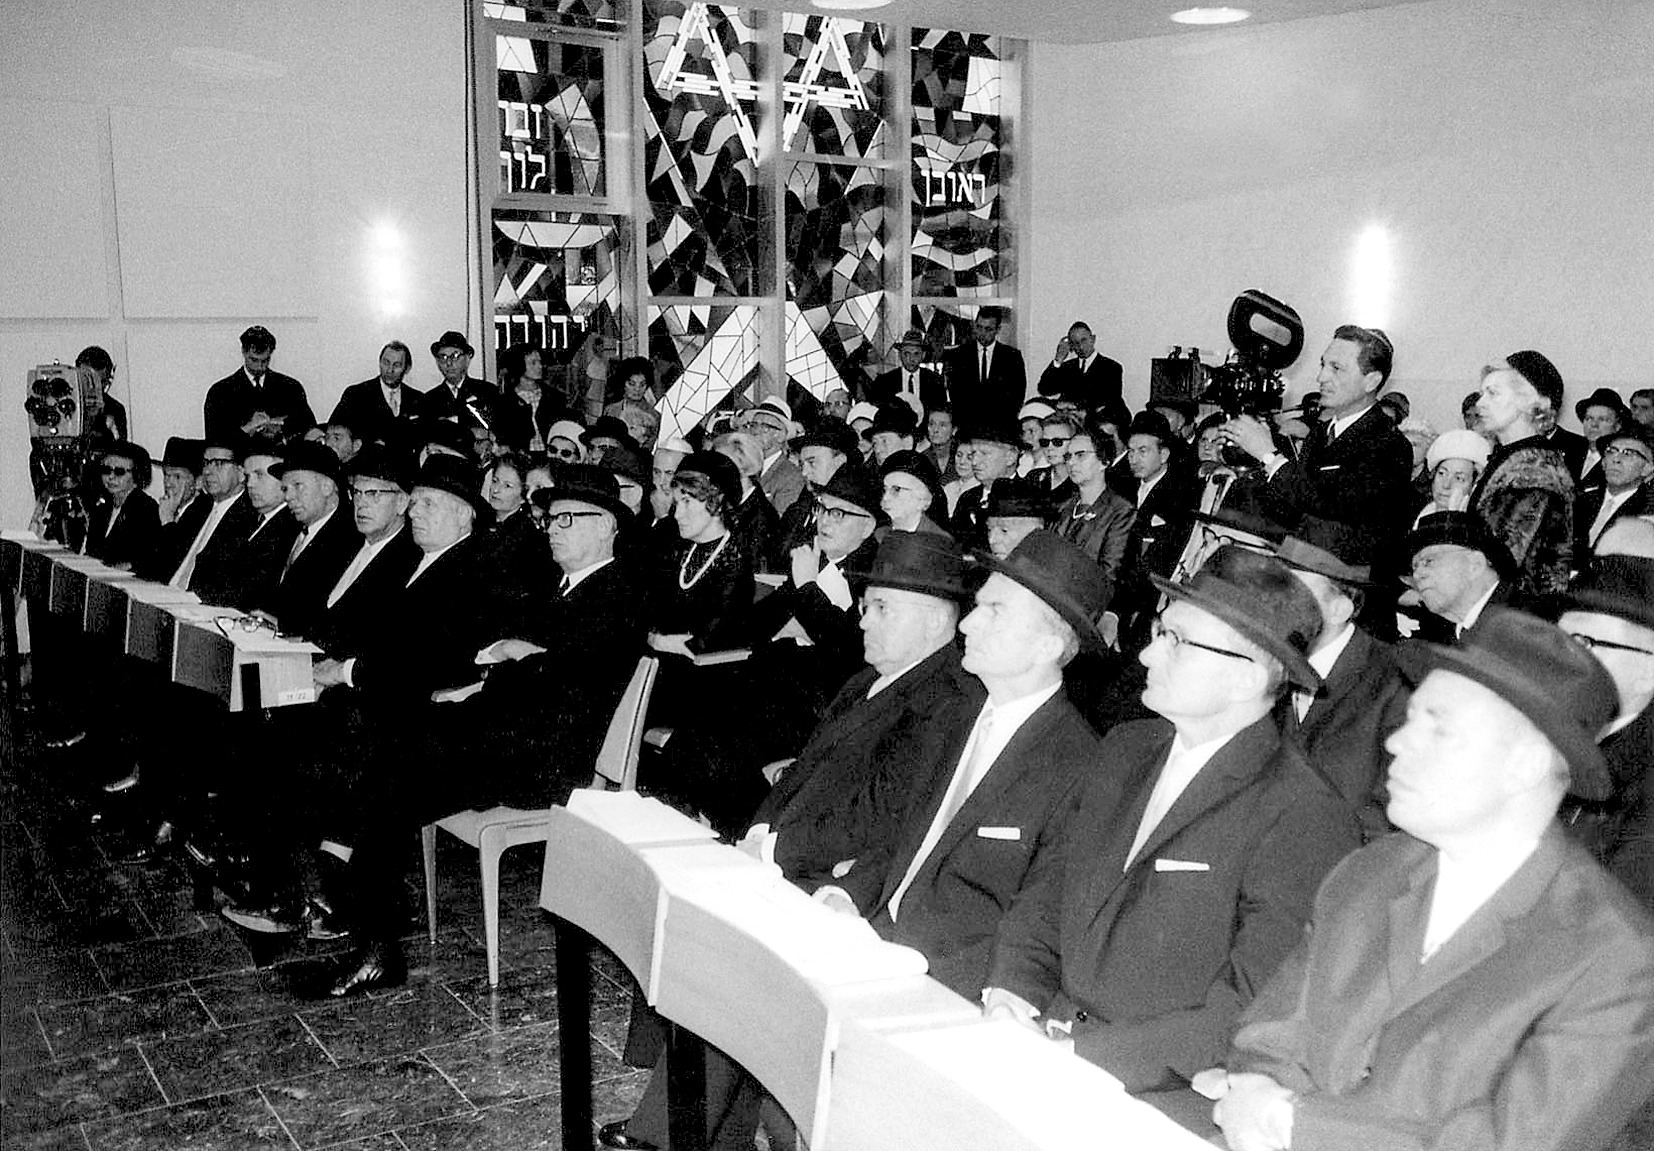 The ceremonial inauguration of the new synagogue building on September 11, 1966. Photographer: Adolf Diamant. Collection Adolf Diamant